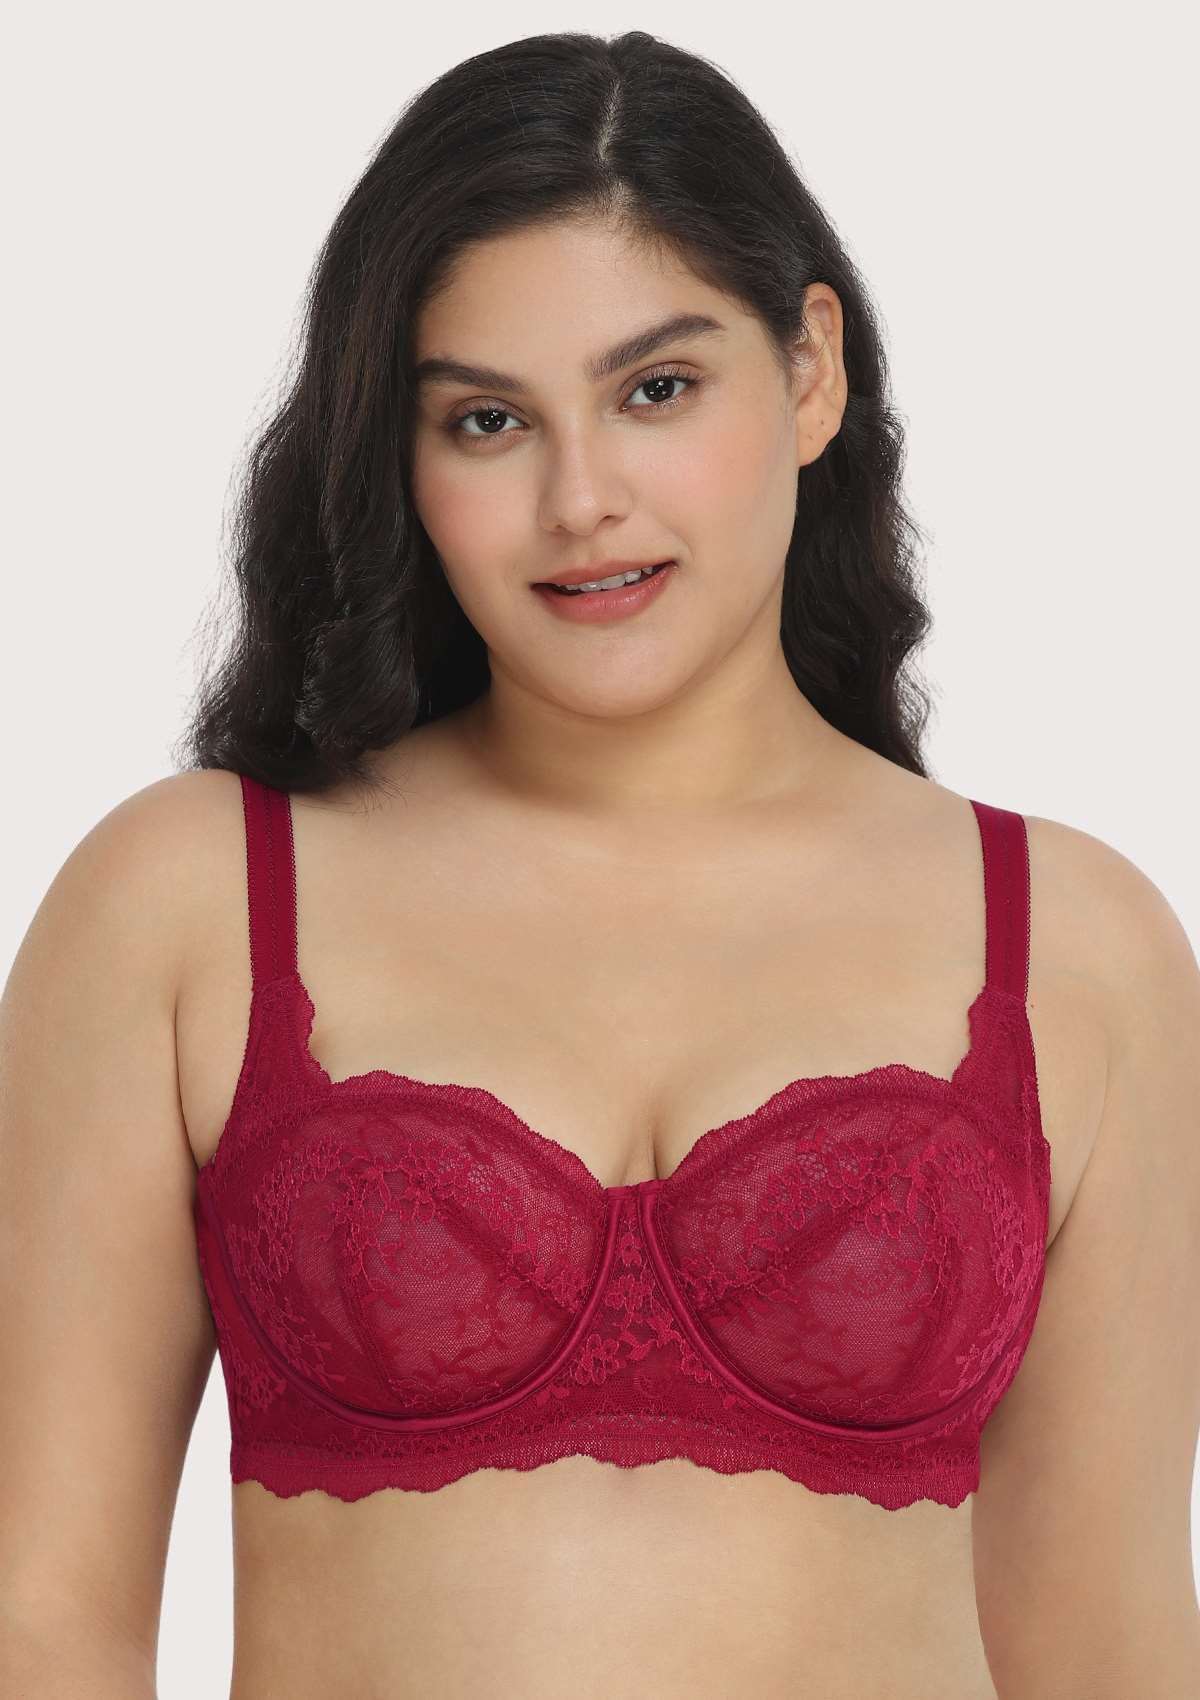 HSIA Floral Lace Unlined Bridal Balconette Bra Set - Supportive Classic - Burgundy / 38 / C